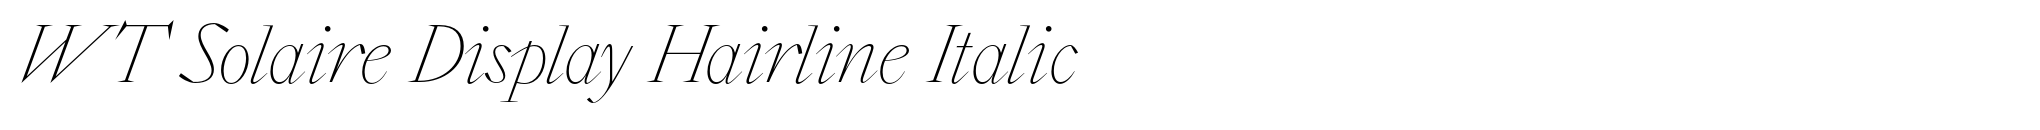 WT Solaire Display Hairline Italic image